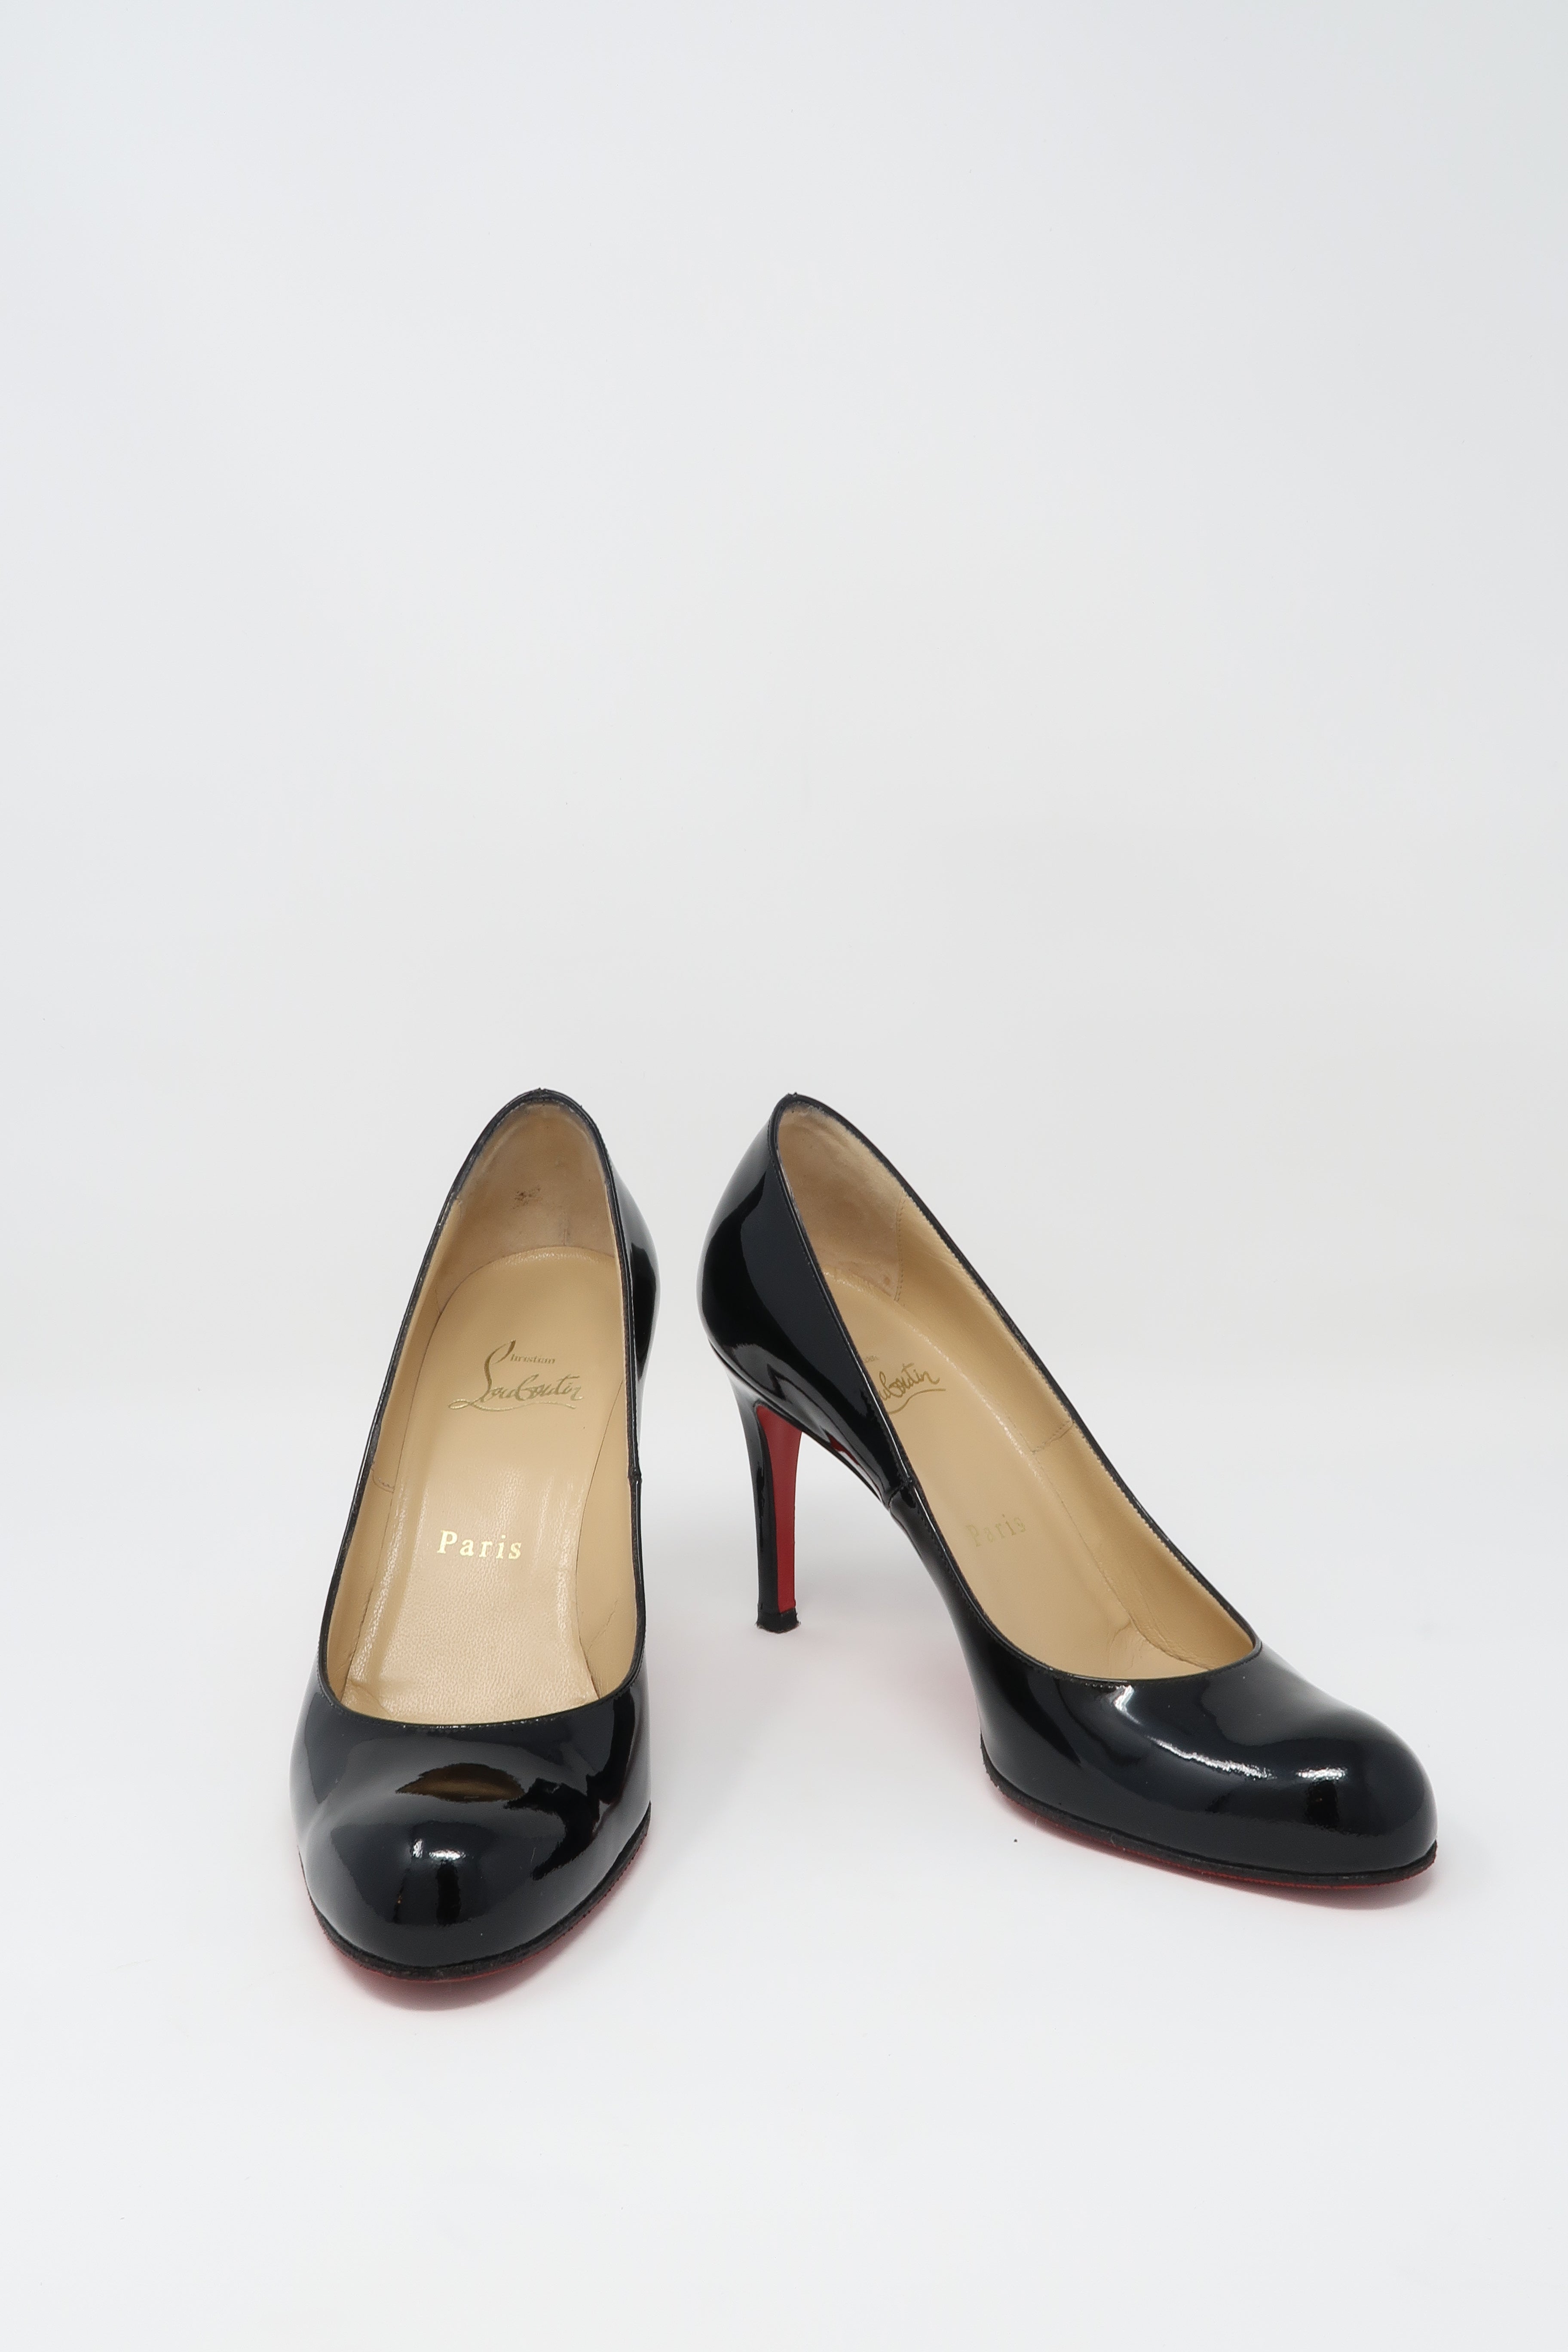 tilgive forberede Print Christian Louboutin Black Patent Leather Simple Pumps | Luxury Finds  Consignment